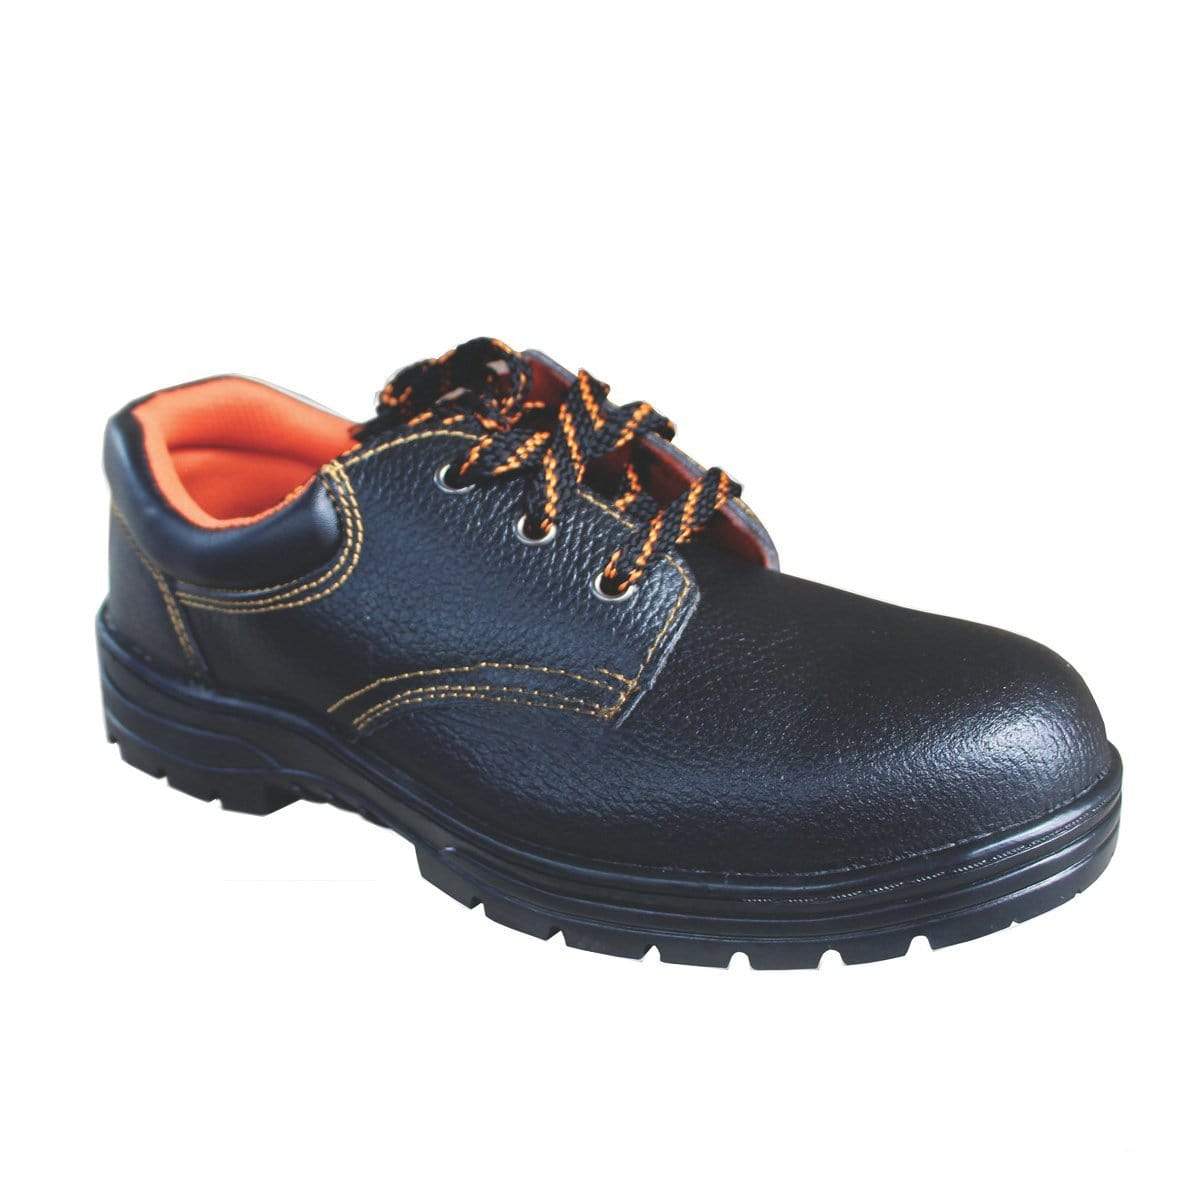 ANEKA Worker Safety Shoes Safety Boots Steel Toe Cap Kasut UK7 1000#